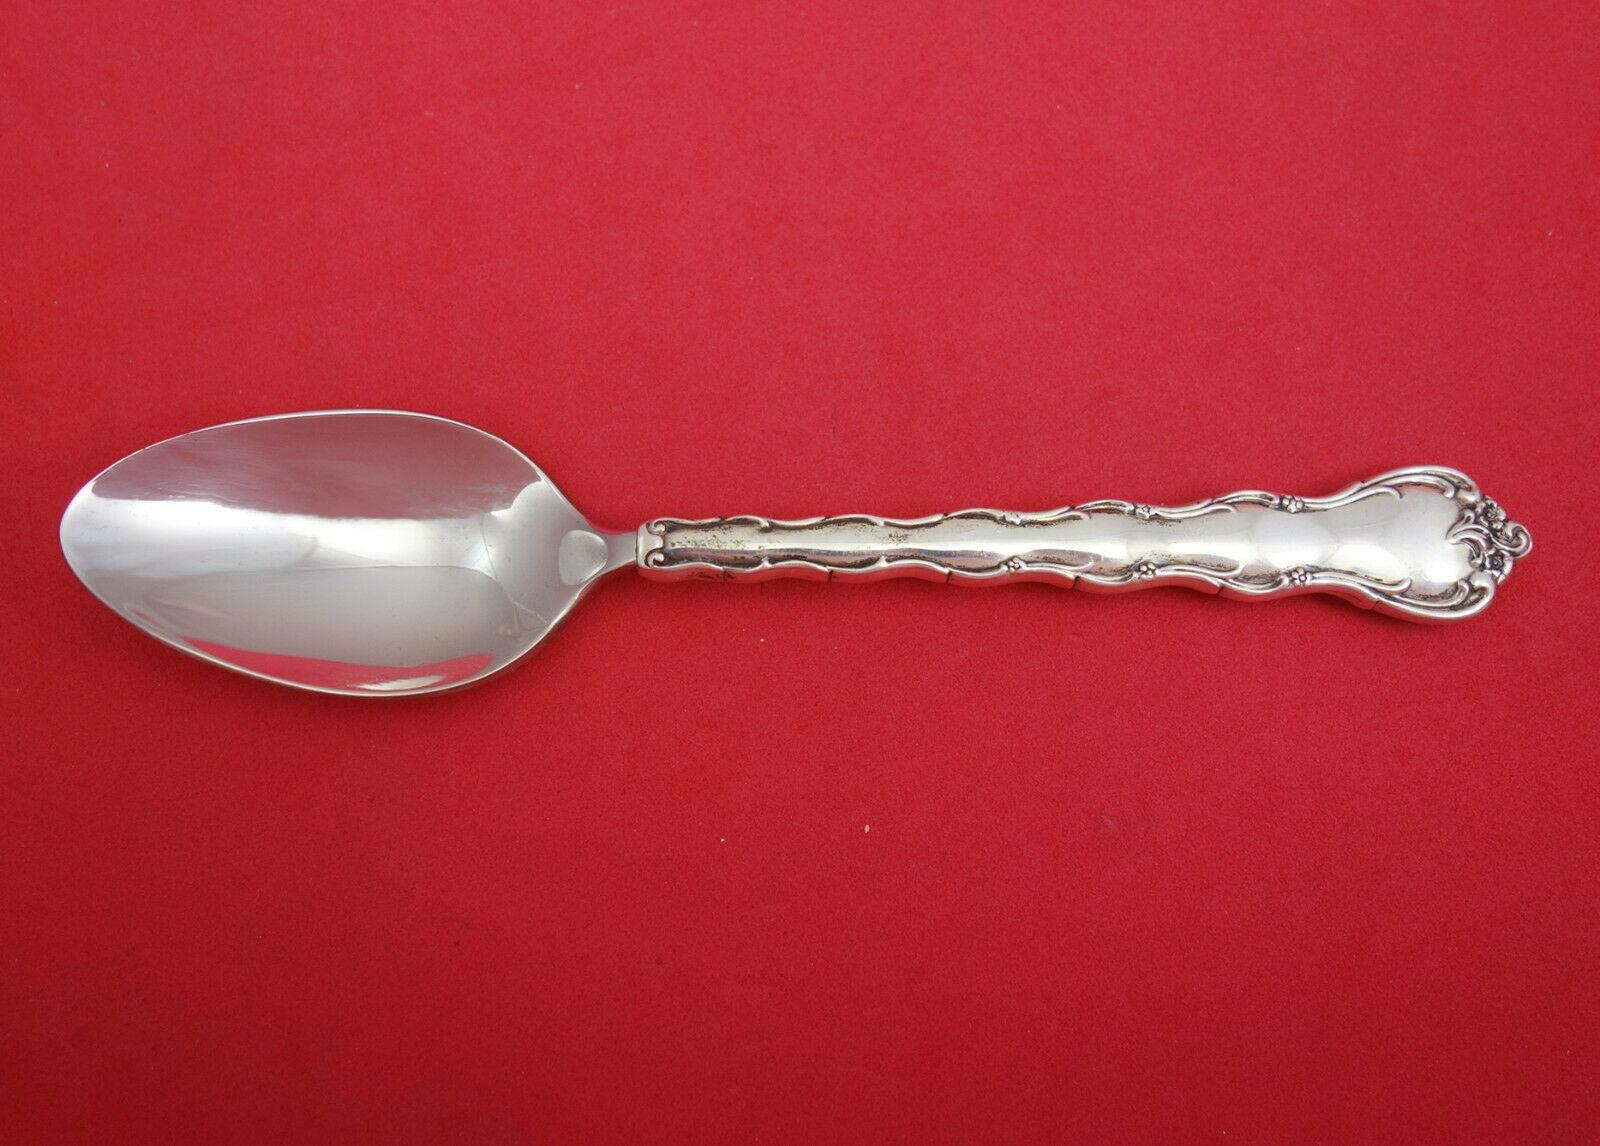 VERY GOOD CONDITION S GW BIRKS CHANTILLY STERLING SILVER CITRUS SPOON 